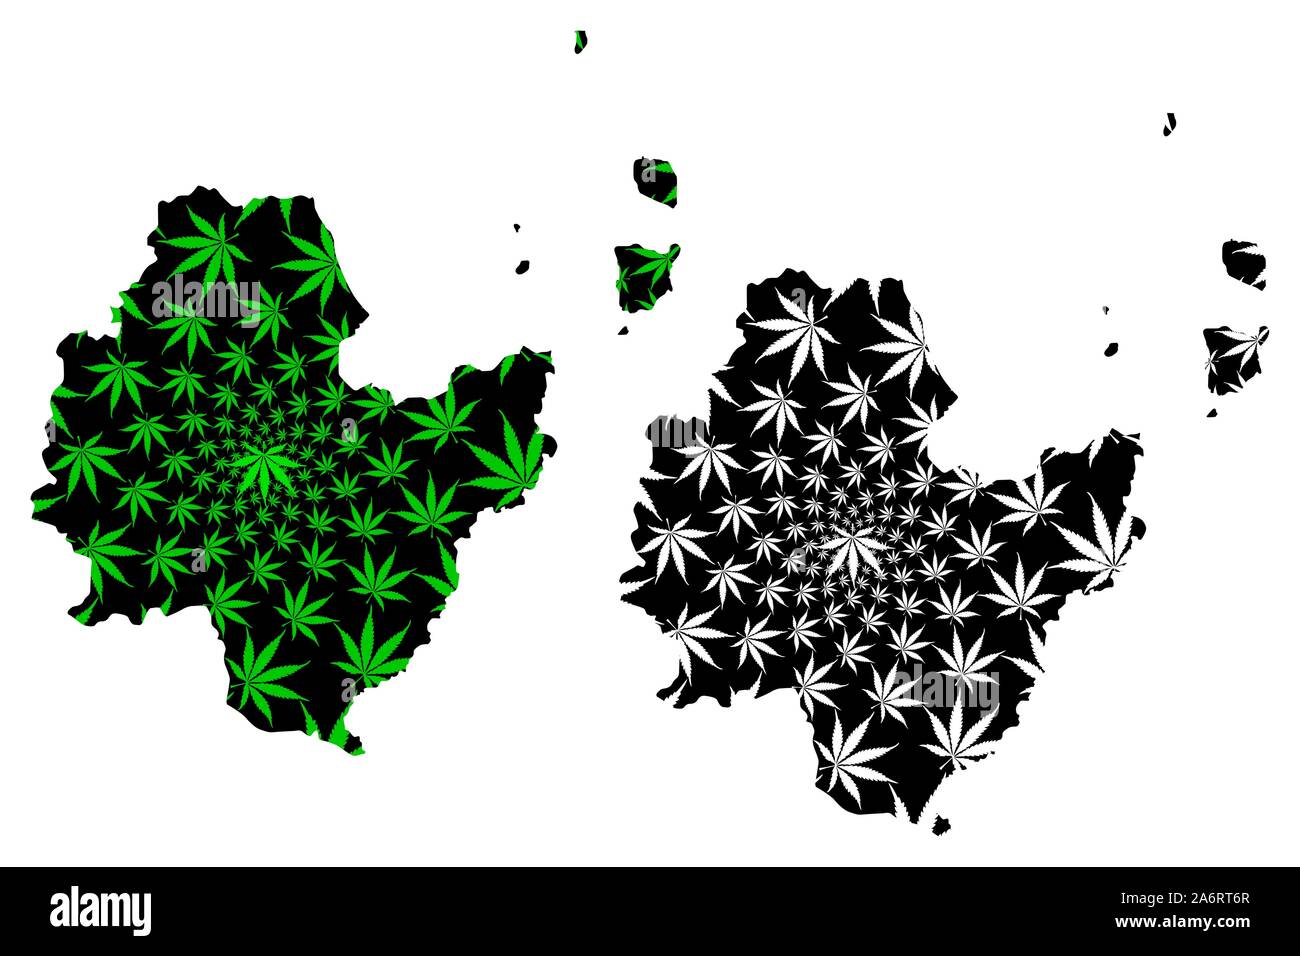 Surat Thani Province (Kingdom of Thailand, Siam, Provinces of Thailand) map is designed cannabis leaf green and black, Surat Thani map made of marijua Stock Vector